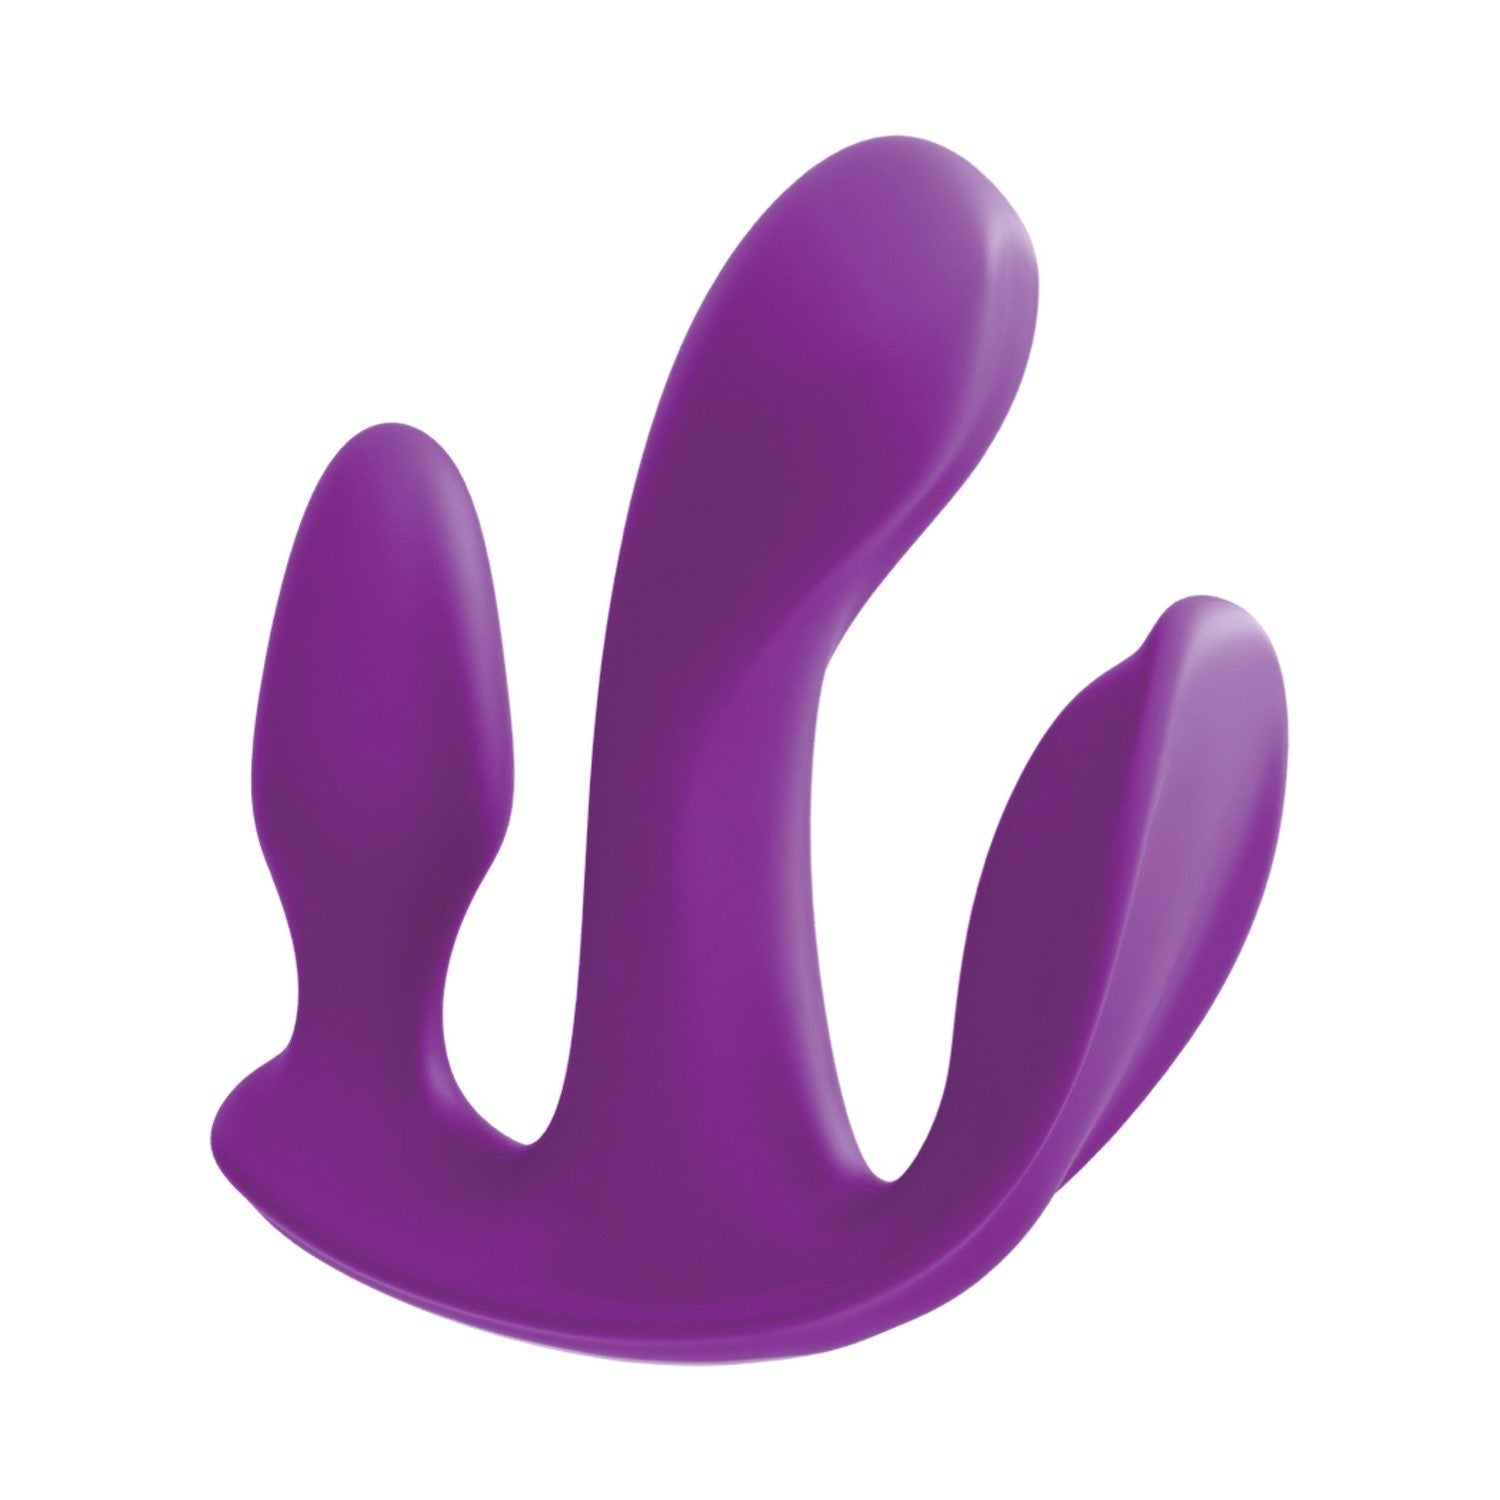 3Some Total Ecstasy - Purple USB Rechargeable Stimulator with Wireless Remote by Pipedream